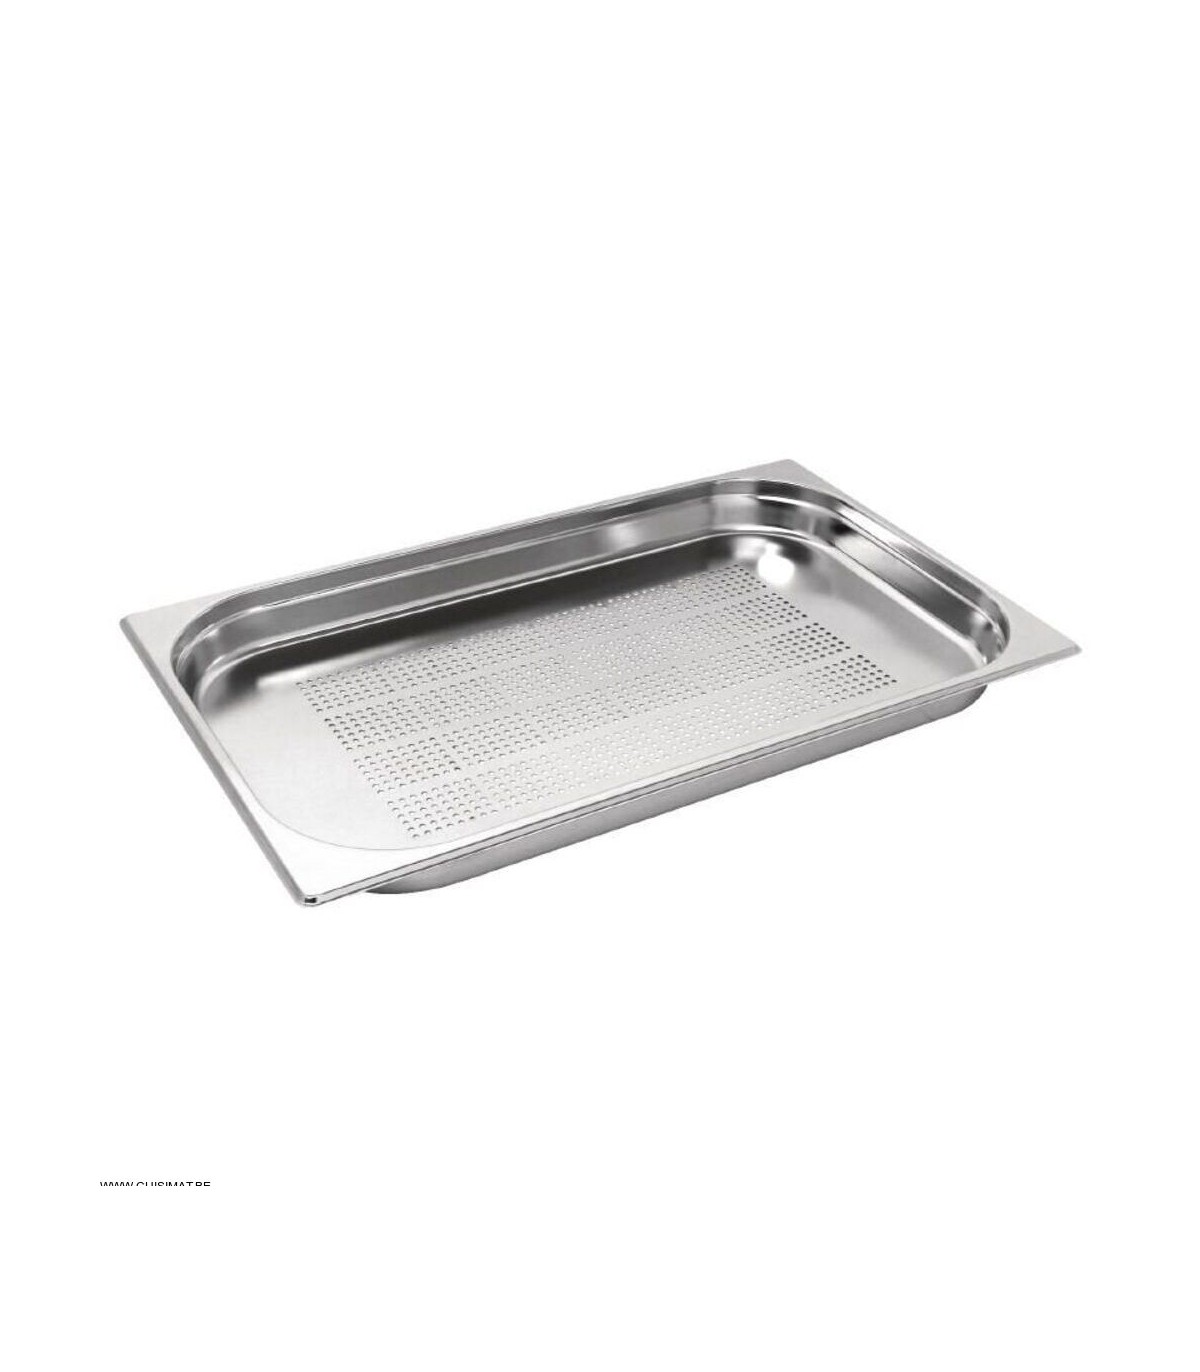 GN 1/1 PERFORE (325 * 530MM) 40 MM  VOGUE dans BACS GASTRONORM ANTI-ADHESIF